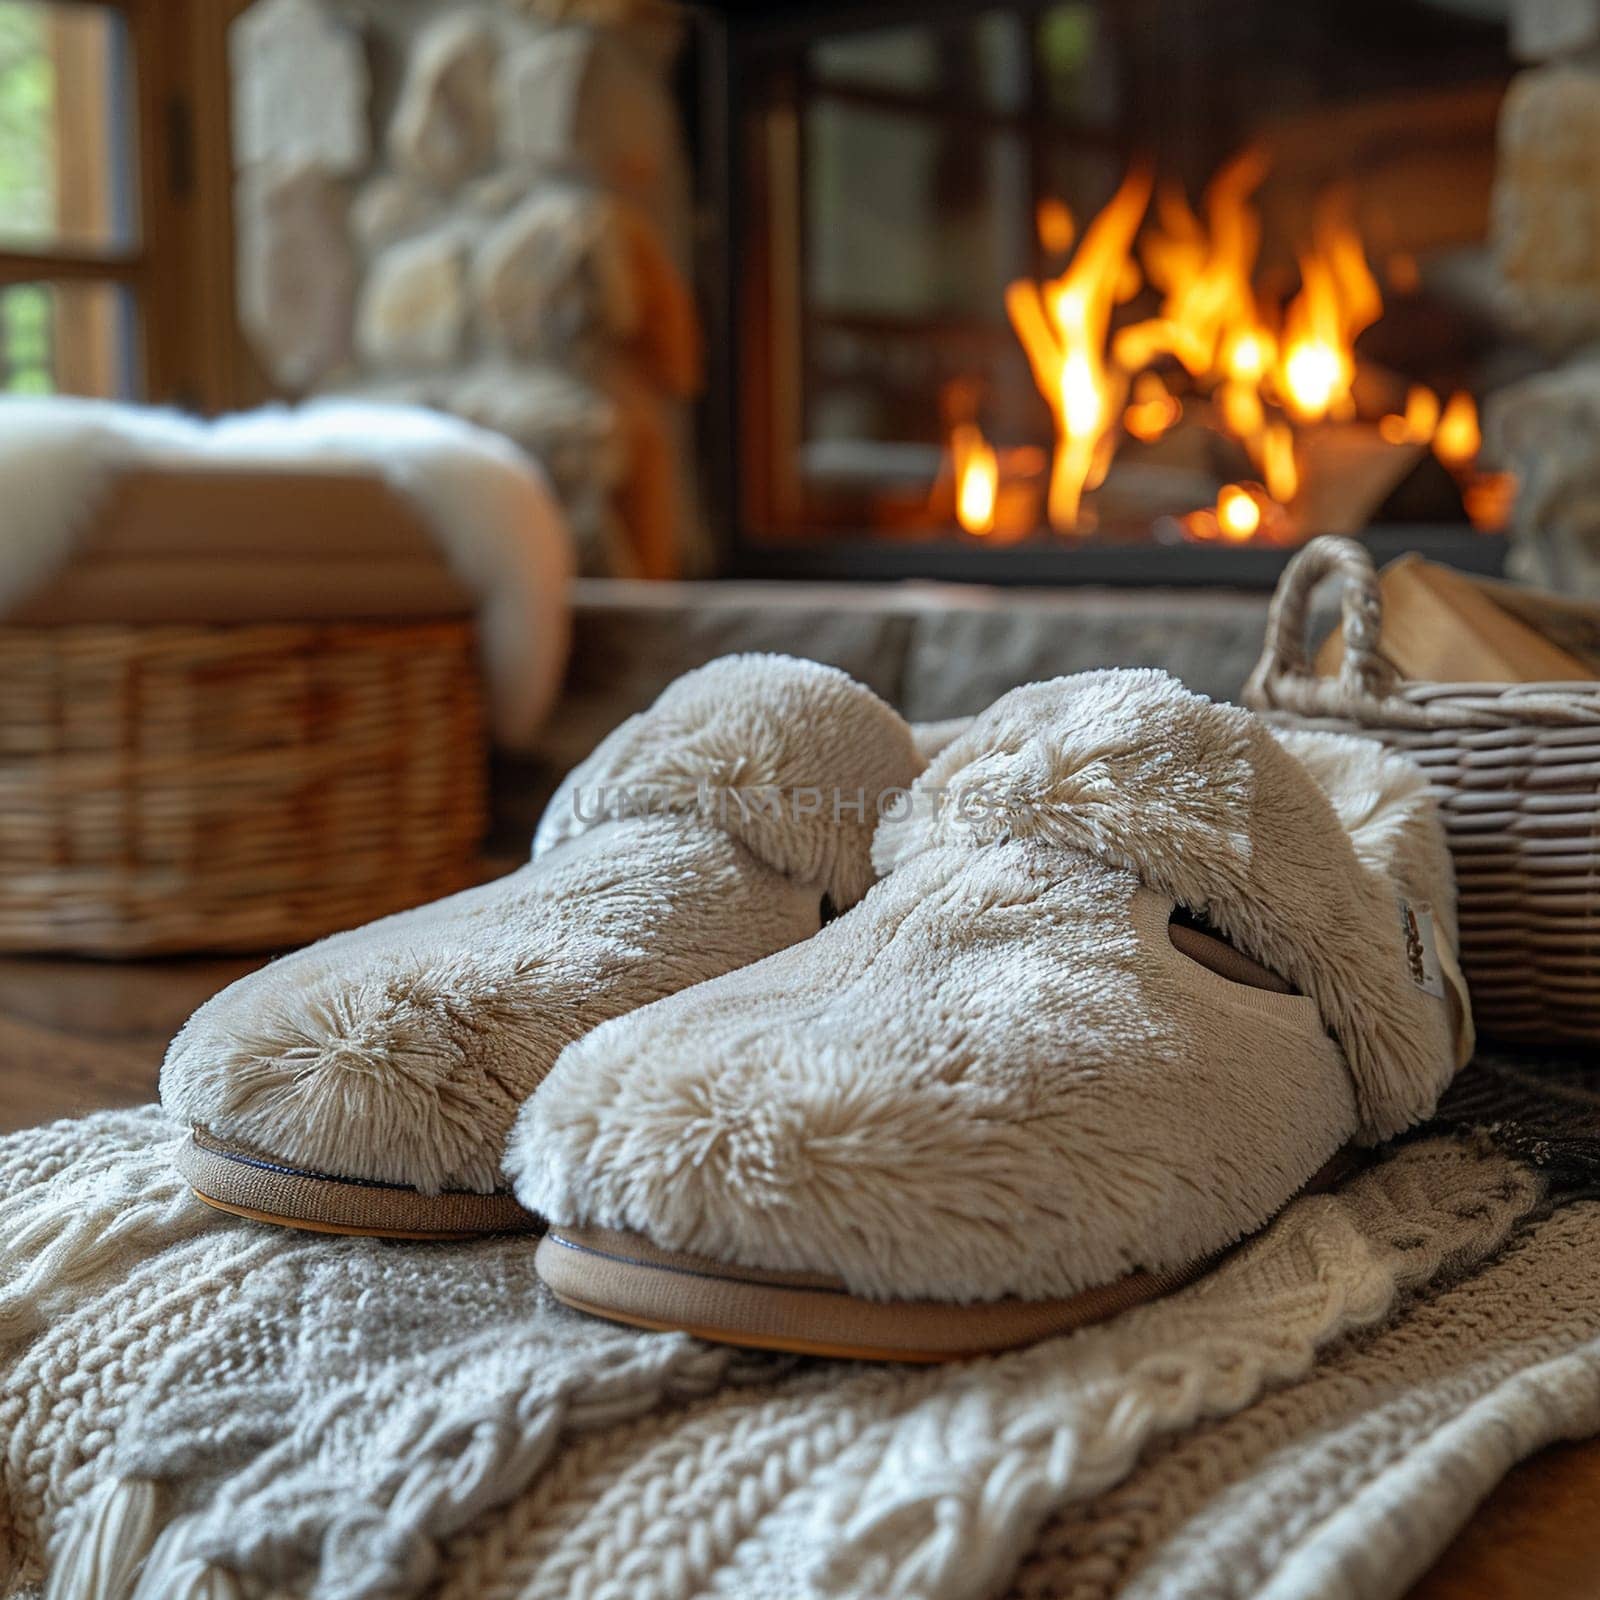 Pair of plush slippers beside cozy fireplace for World Sleep Day. by Benzoix